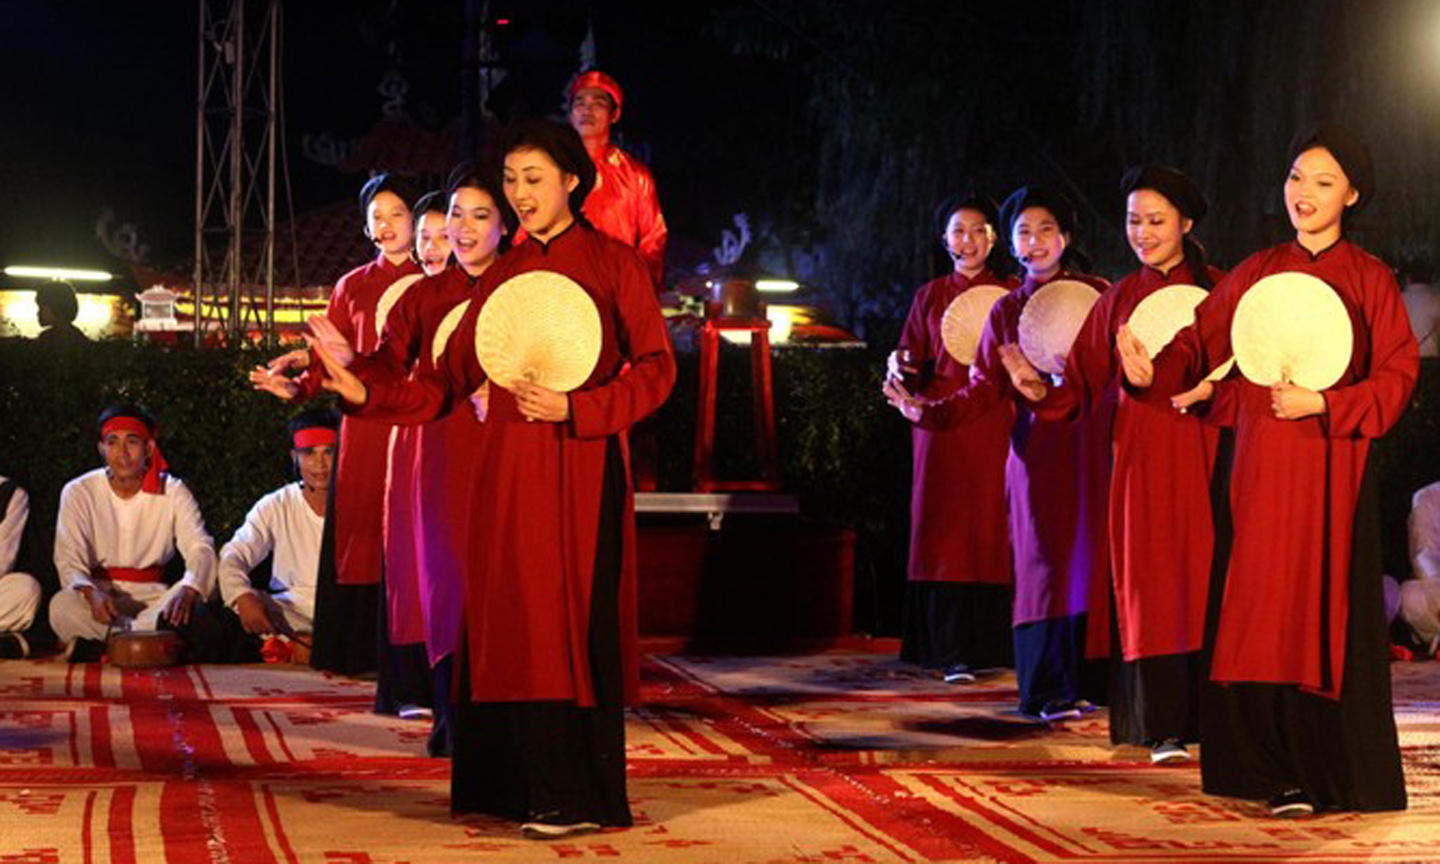 A performance of Xoan singing, a UNESCO-recognised intangible cultural heritage in Phu Tho province (Photo: toquoc.vn).